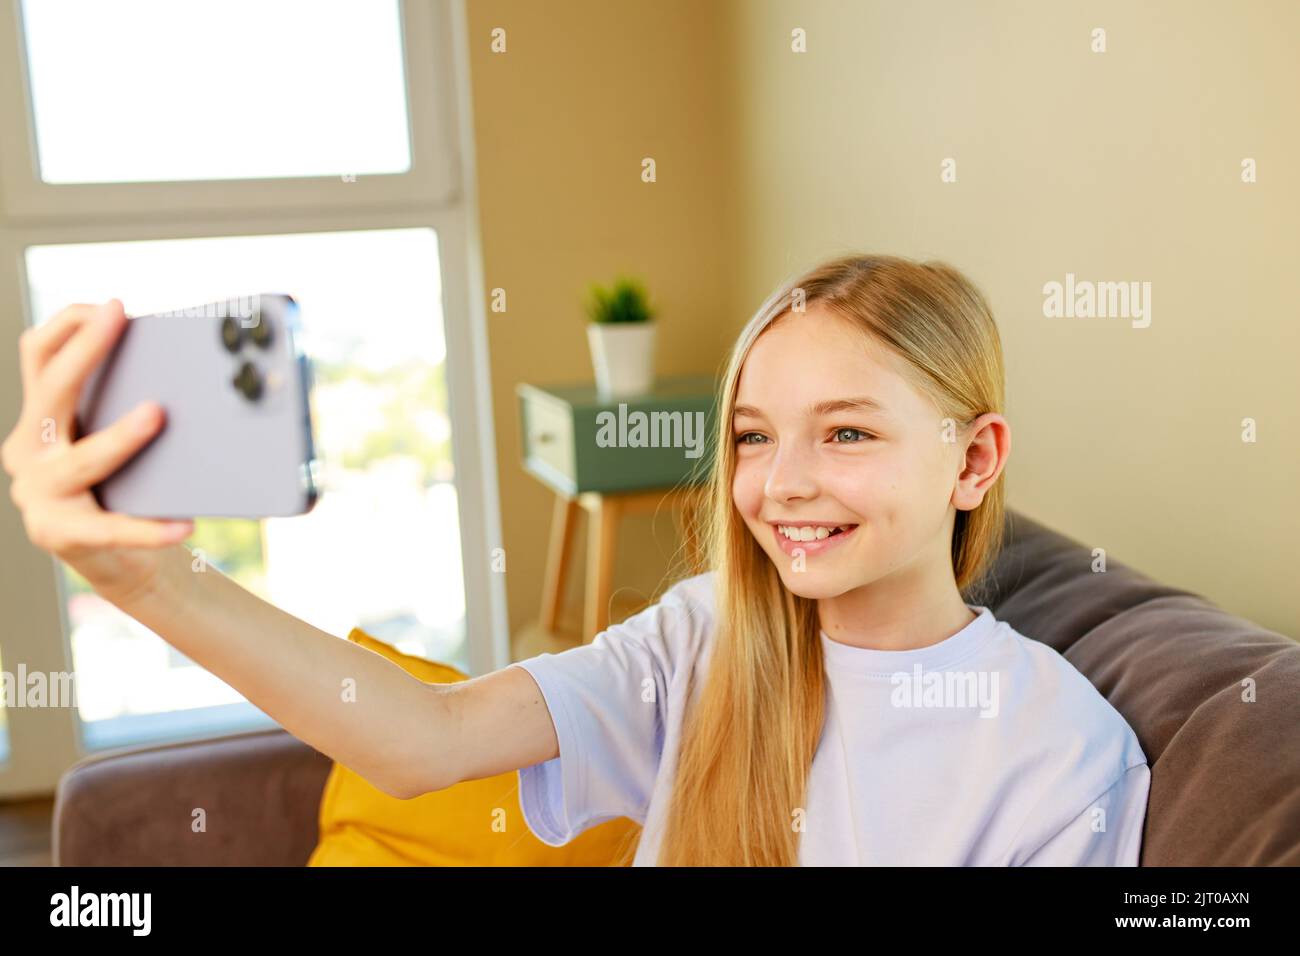 pre-teen girl making selfie photos on her smartphone in cozy living room at home Stock Photo